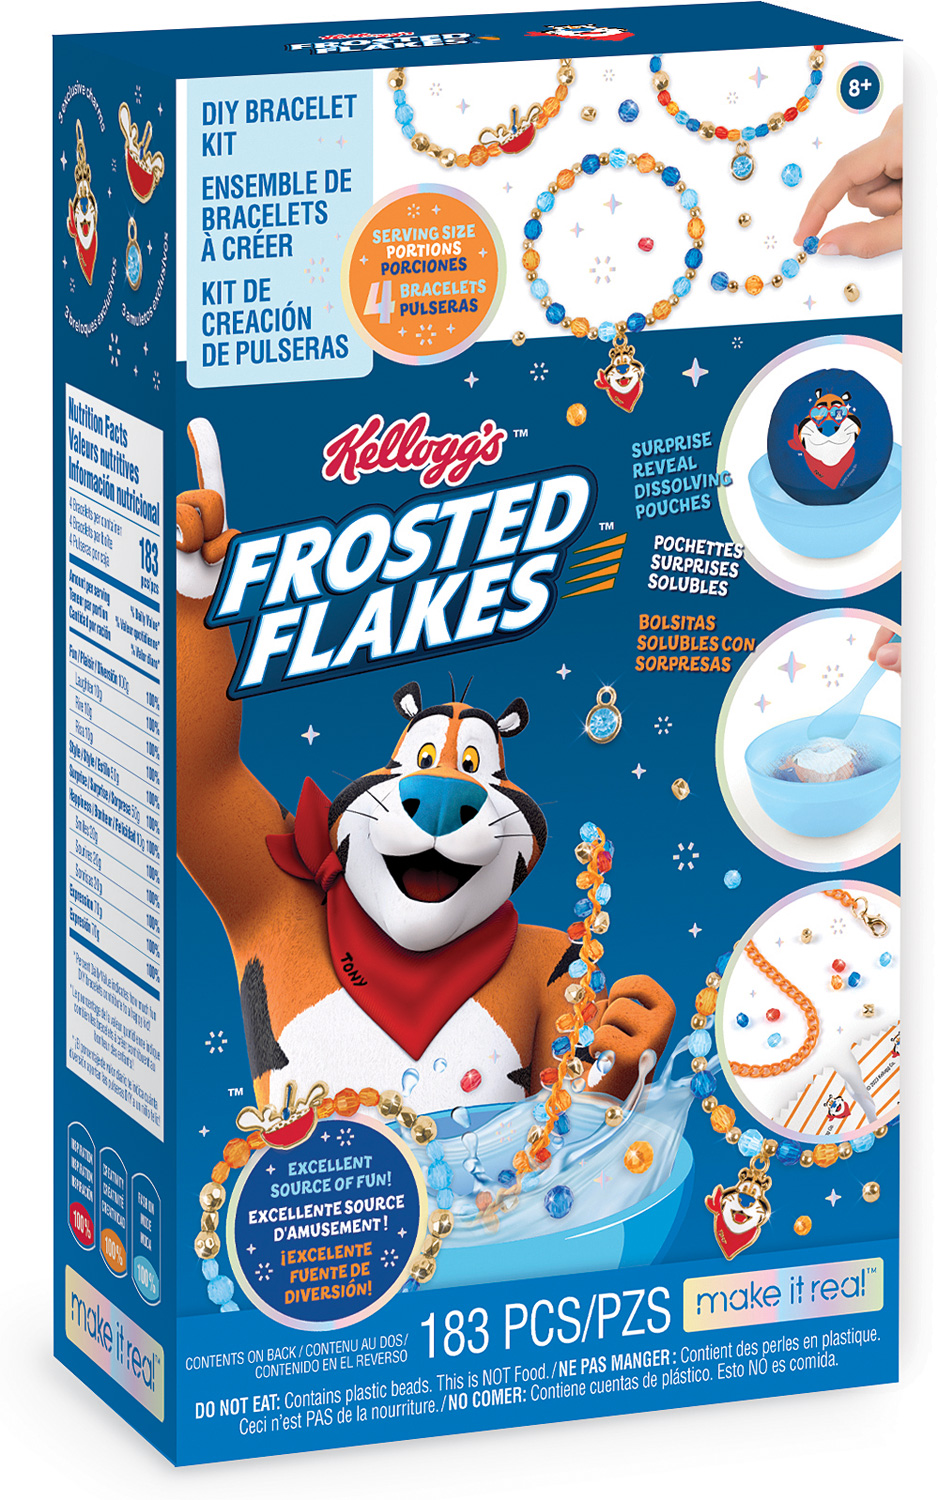 Cereal-sly Cute Kellogg's Frosted Flakes DIY Bracelet Kit - The Toy Box  Hanover